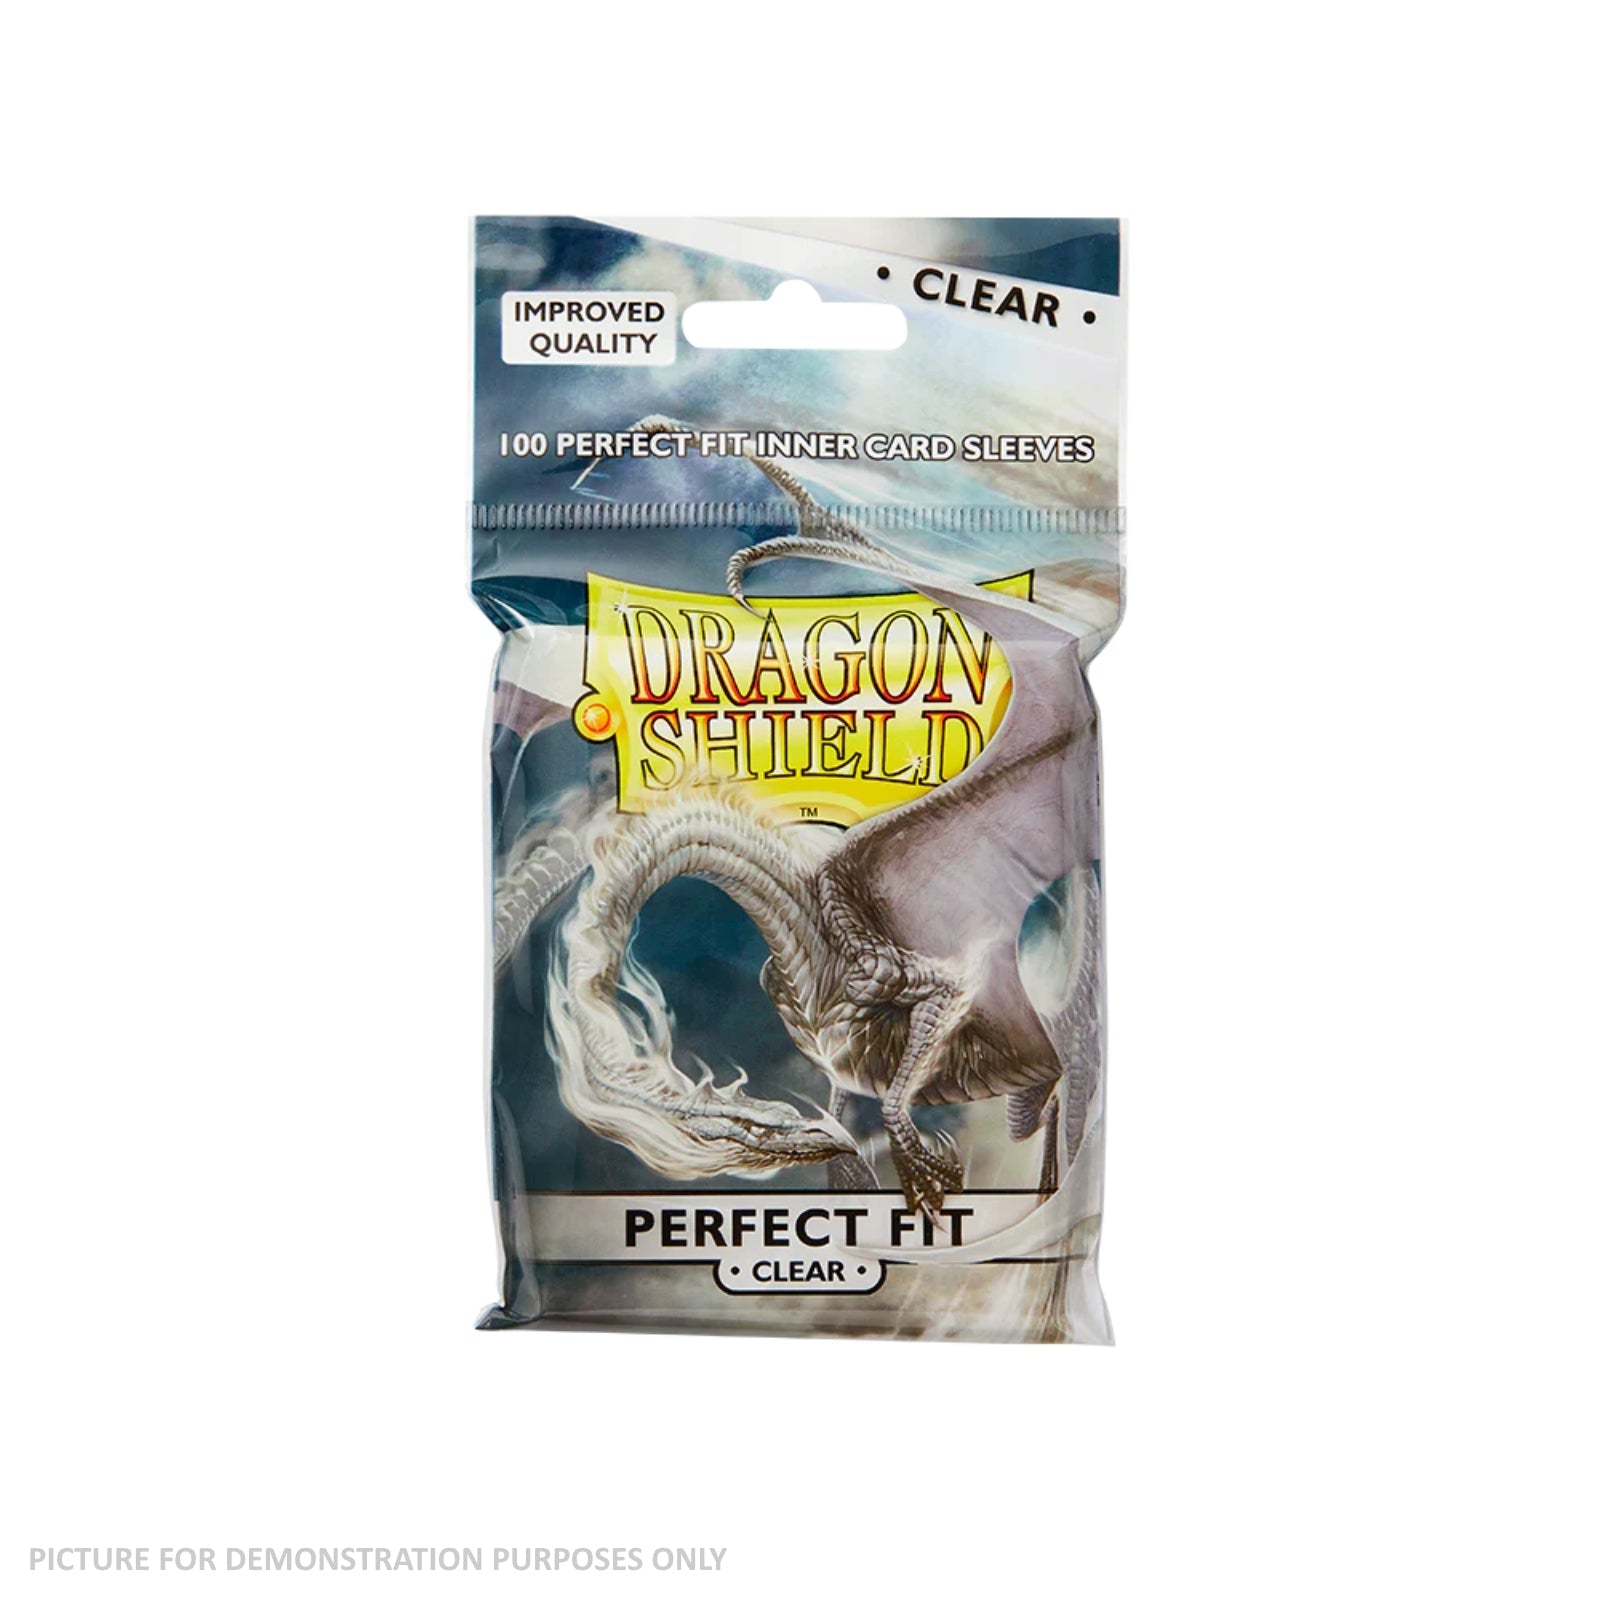 Dragon Shield 100 Perfect Fit Sleeves - Clear